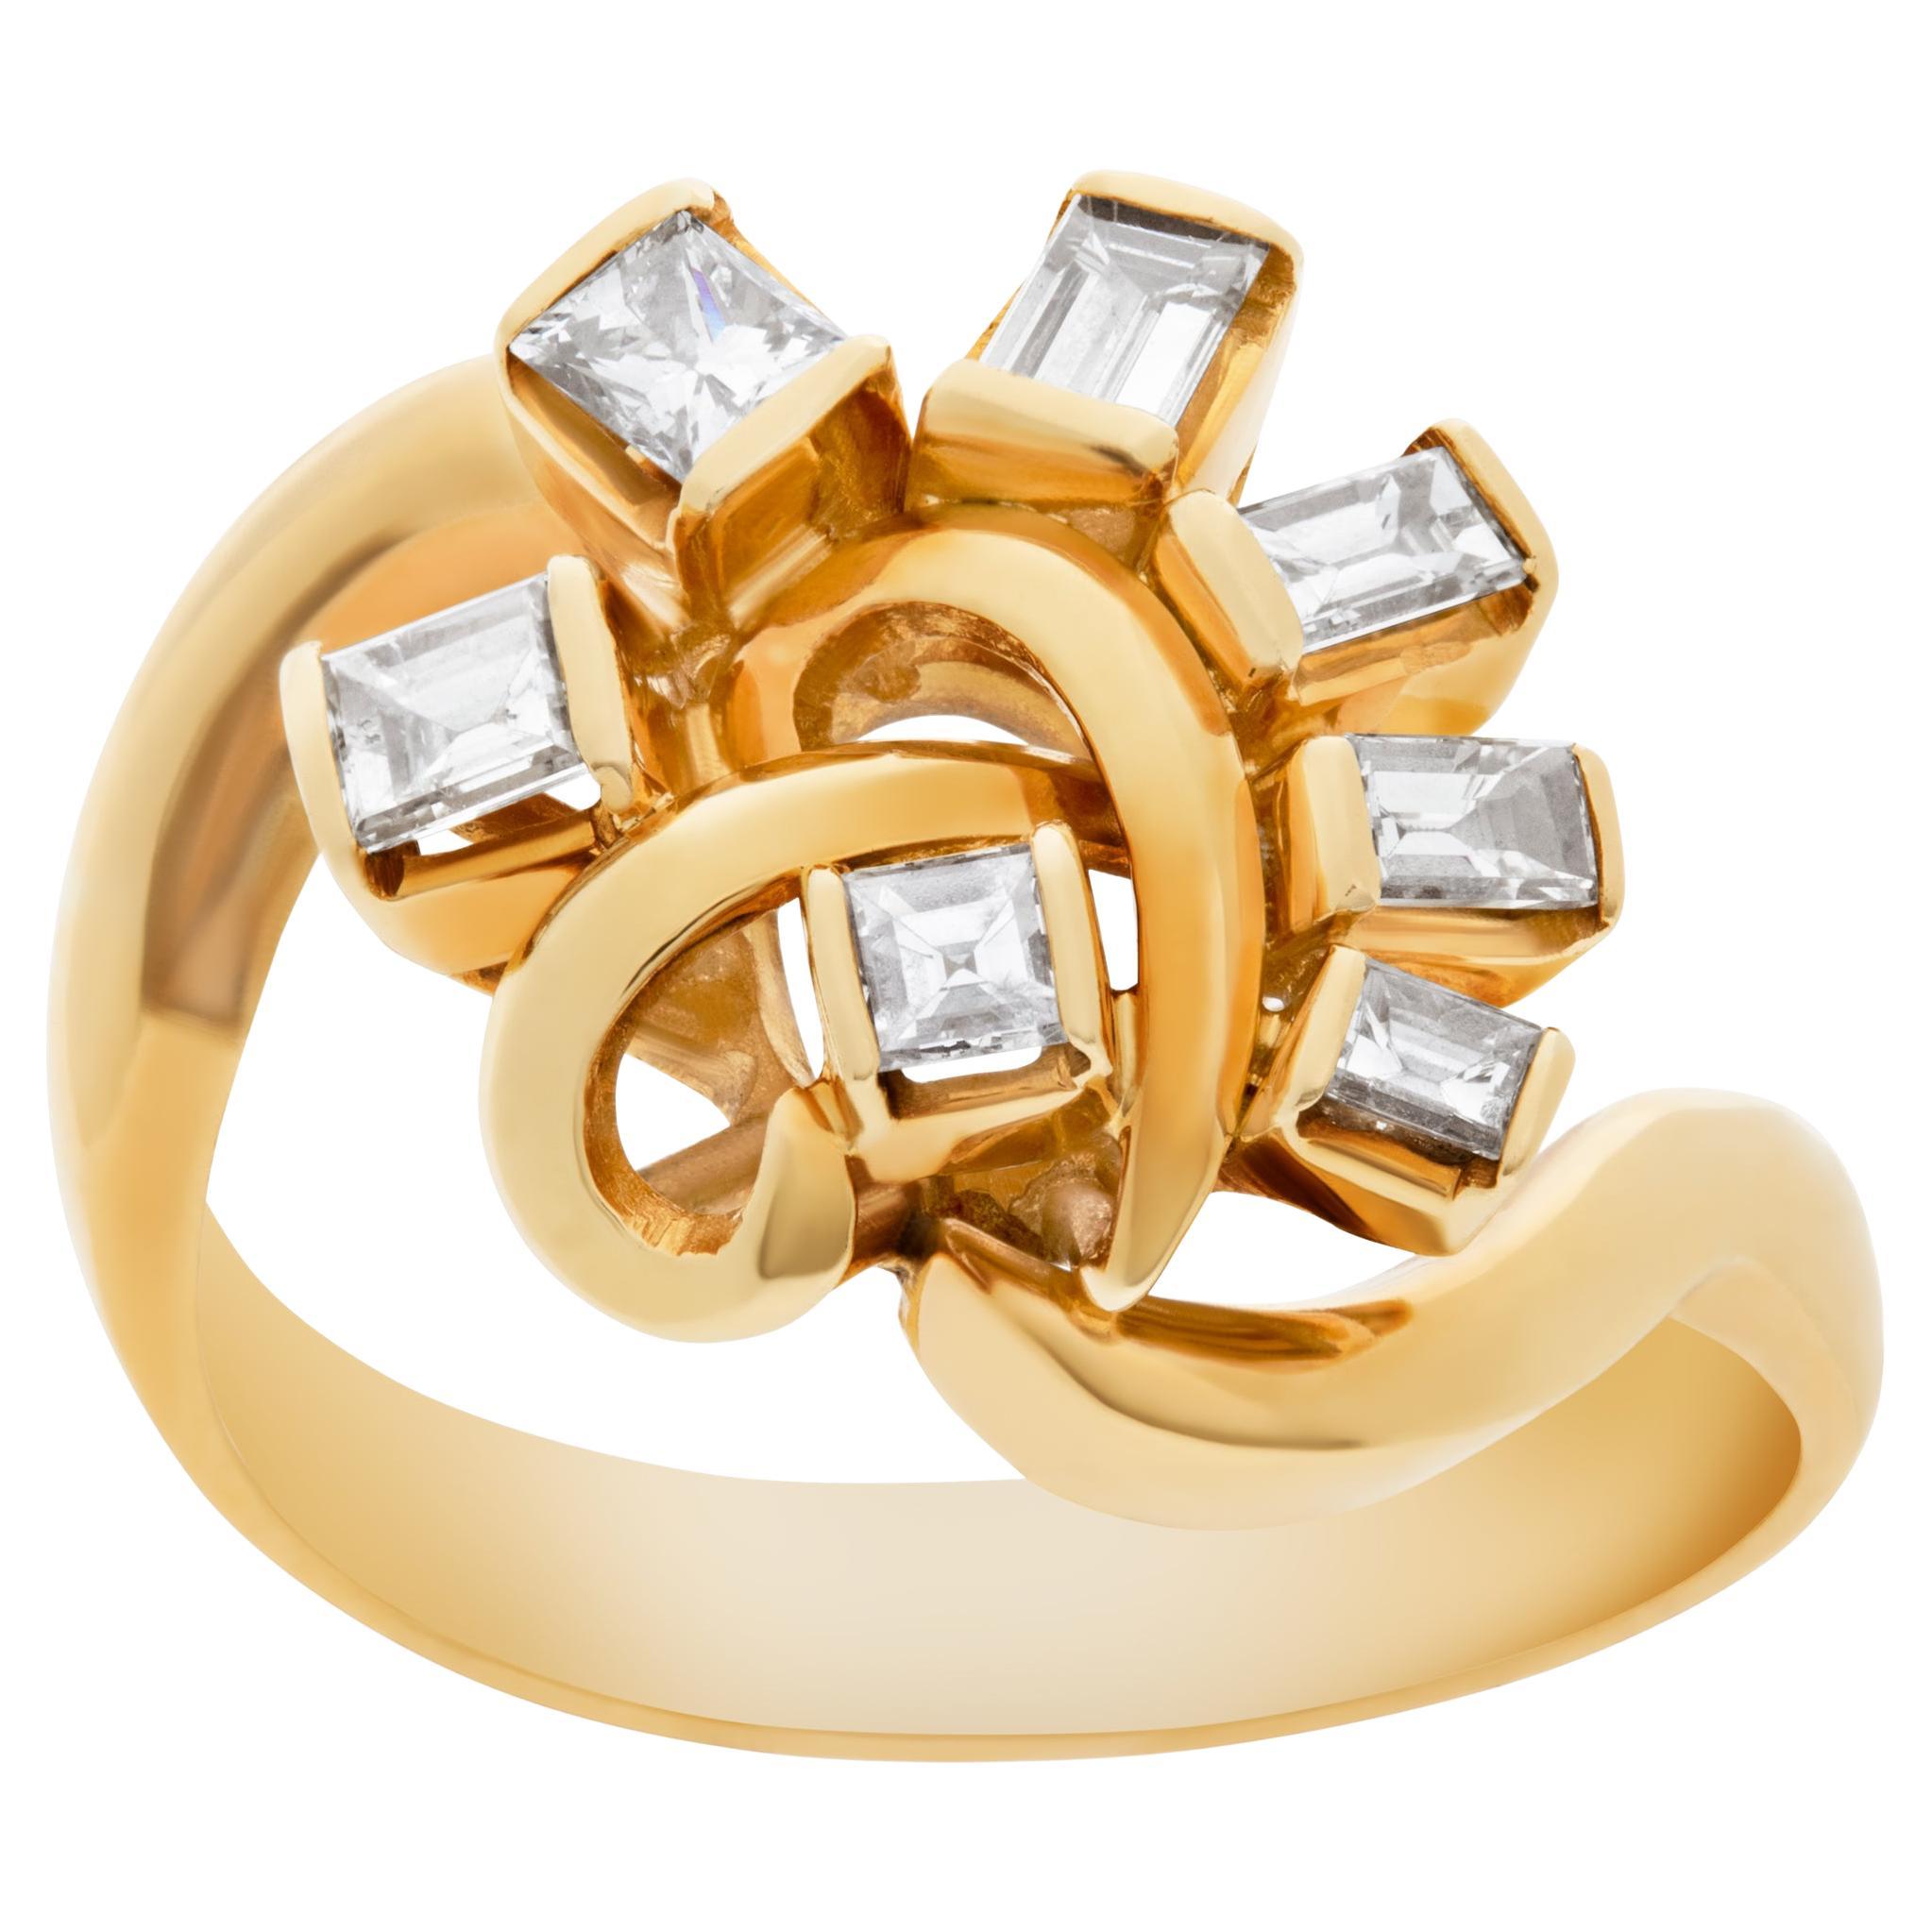 Swirl ring with diamonds set in 18k yellow gold For Sale